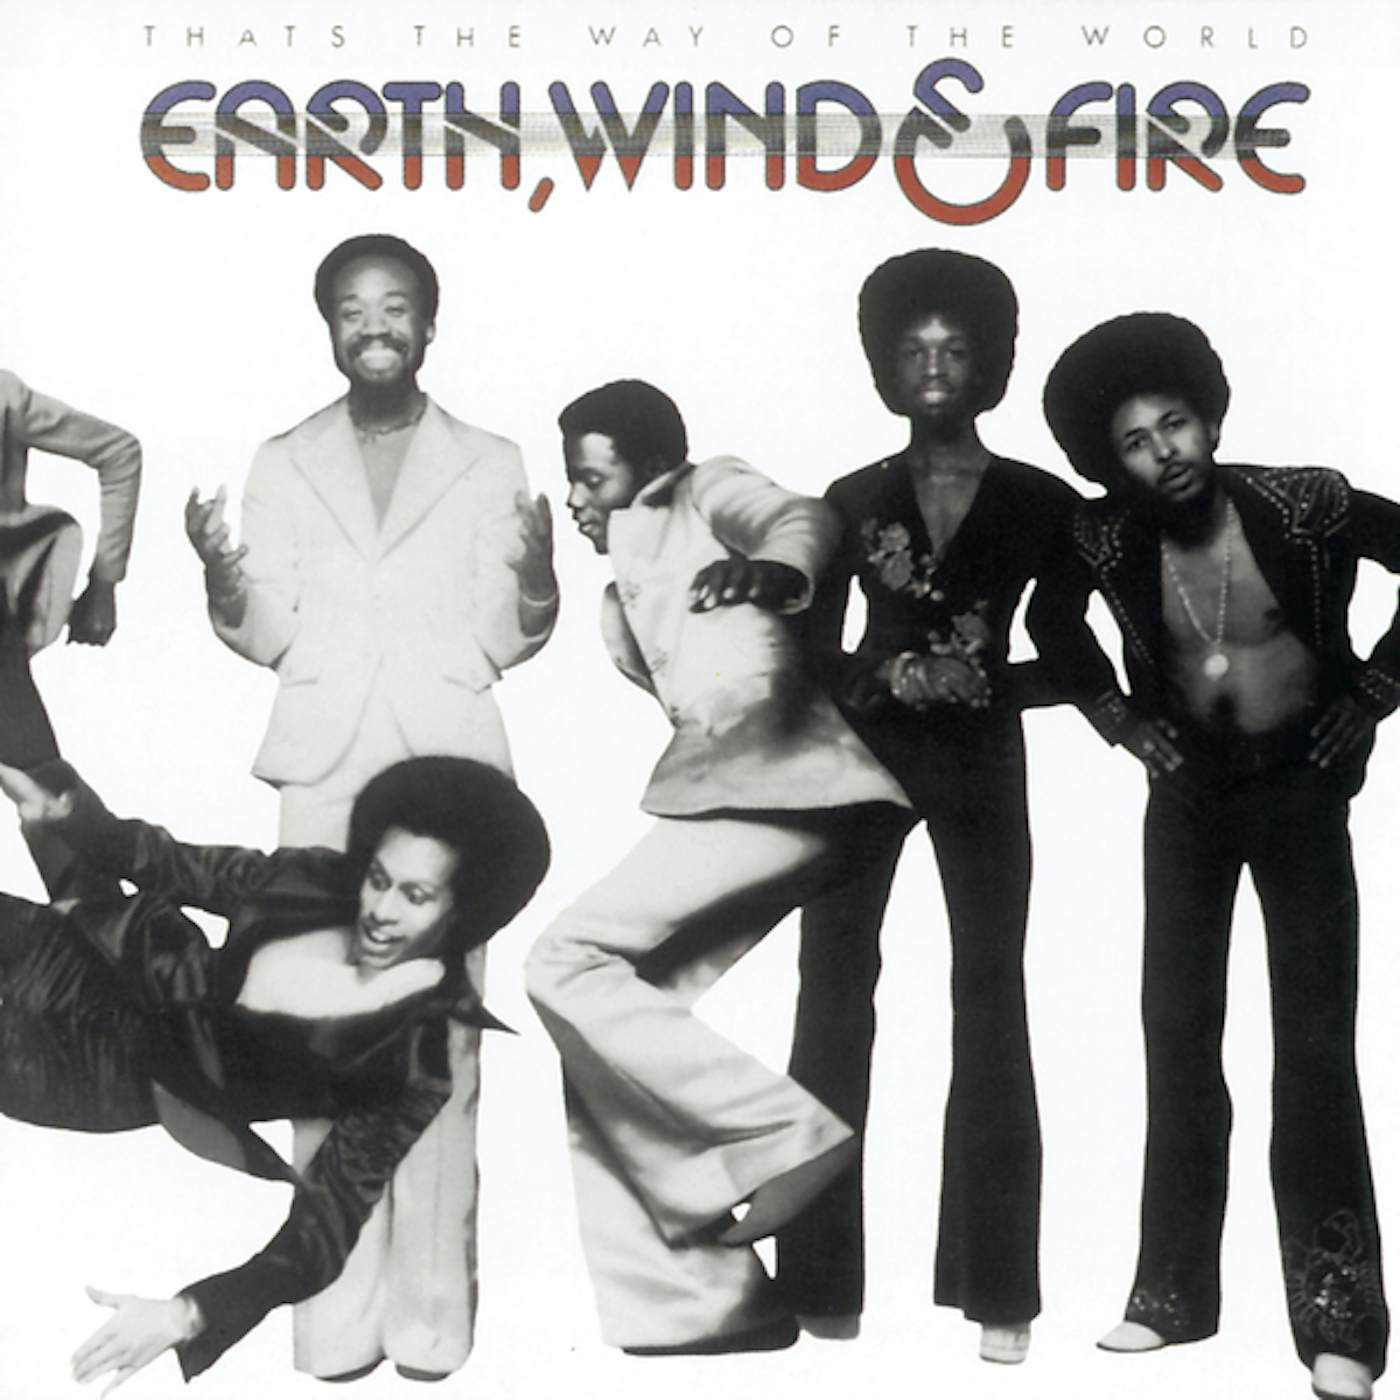 Earth, Wind & Fire THAT'S THE WAY OF THE WORLD CD